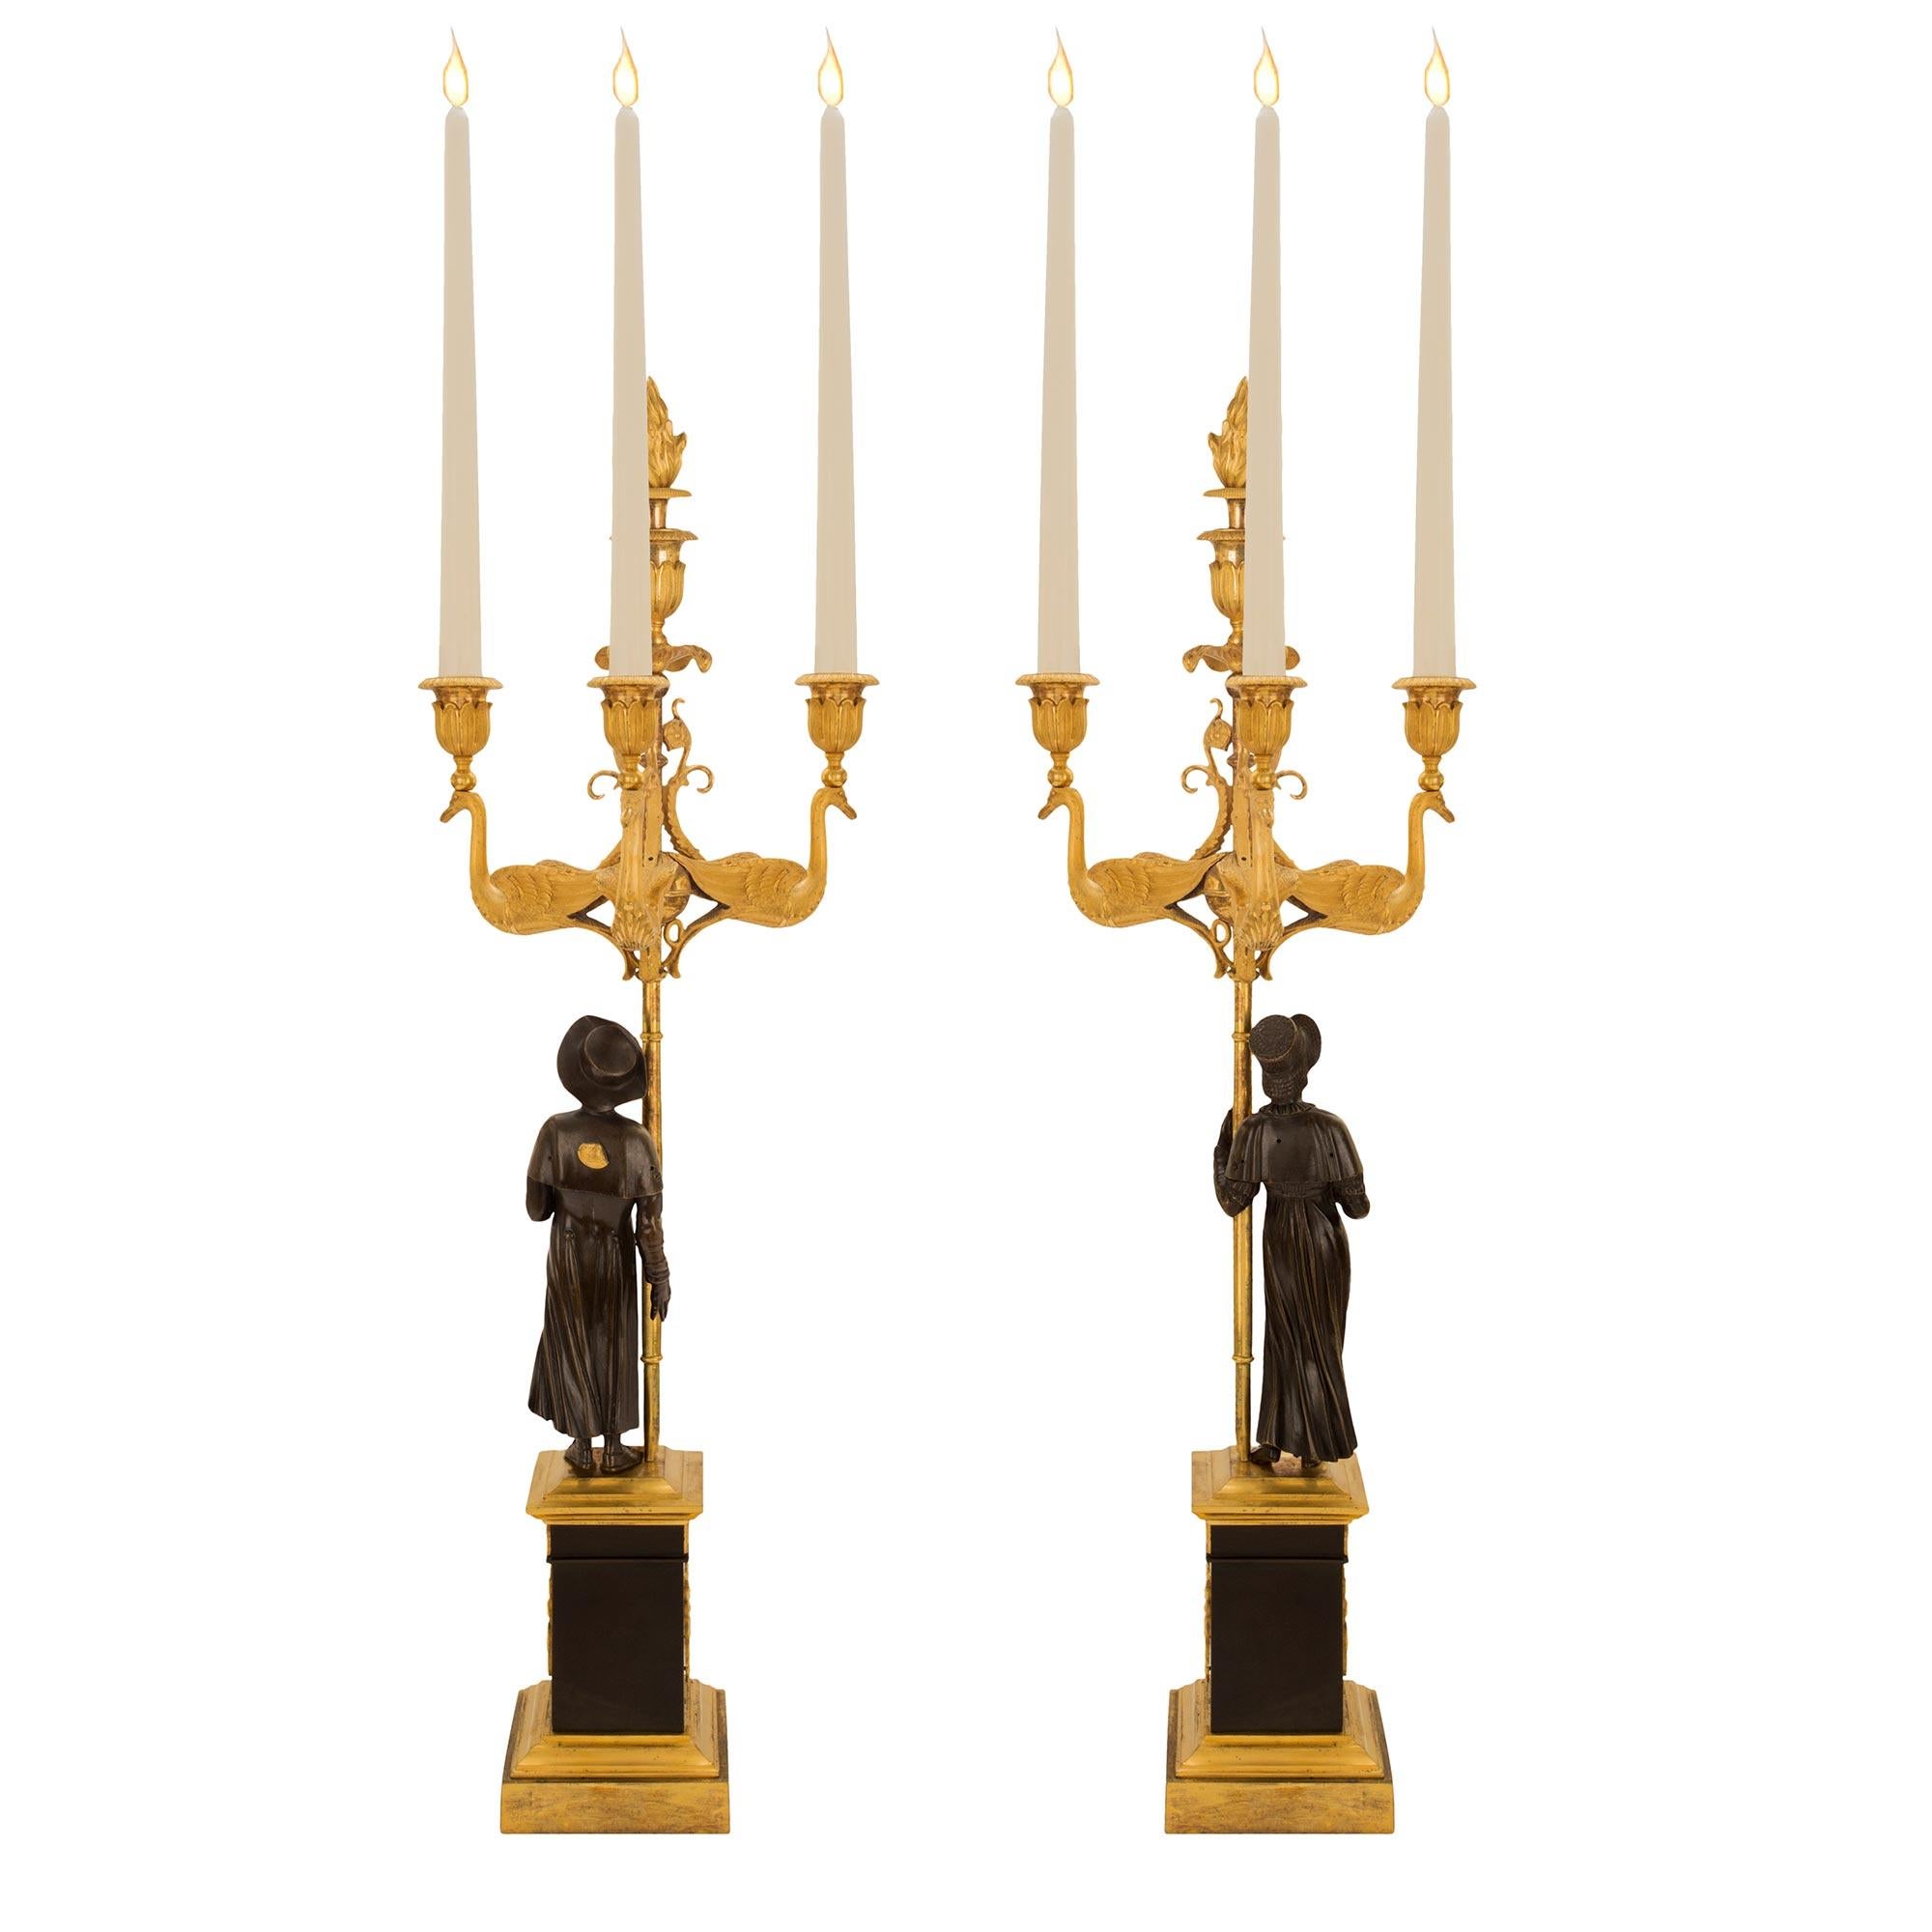 Pair of French 1st Empire Period Bronze and Ormolu Three-Light Candelabras In Good Condition For Sale In West Palm Beach, FL